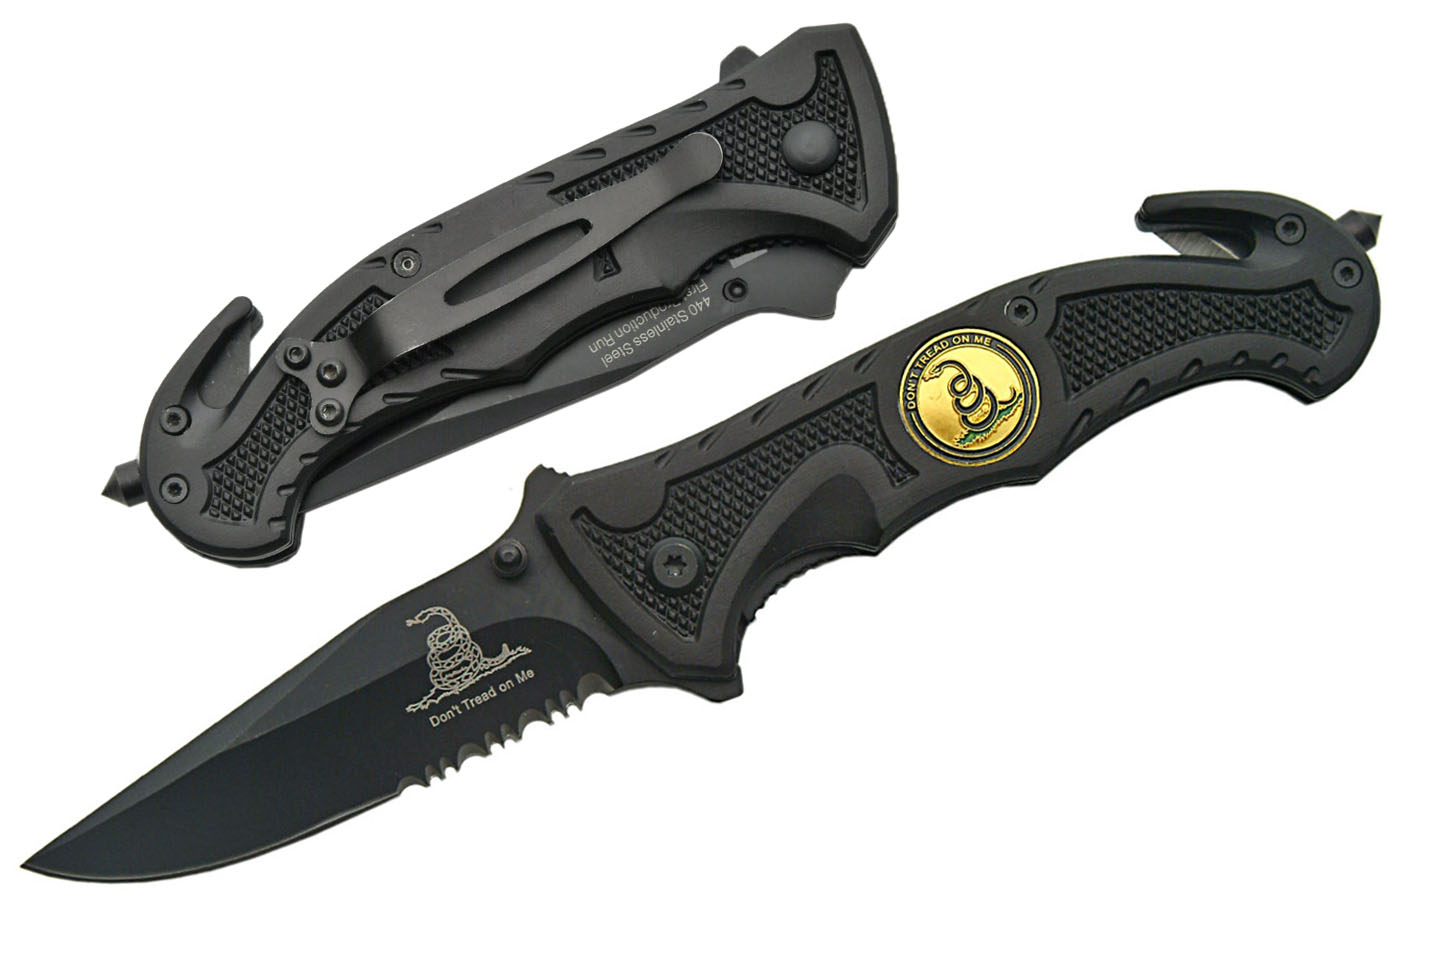 Spring-Assist Folding Knife 'Dont Tread On Me' Black Serrated Blade Rescue EDC